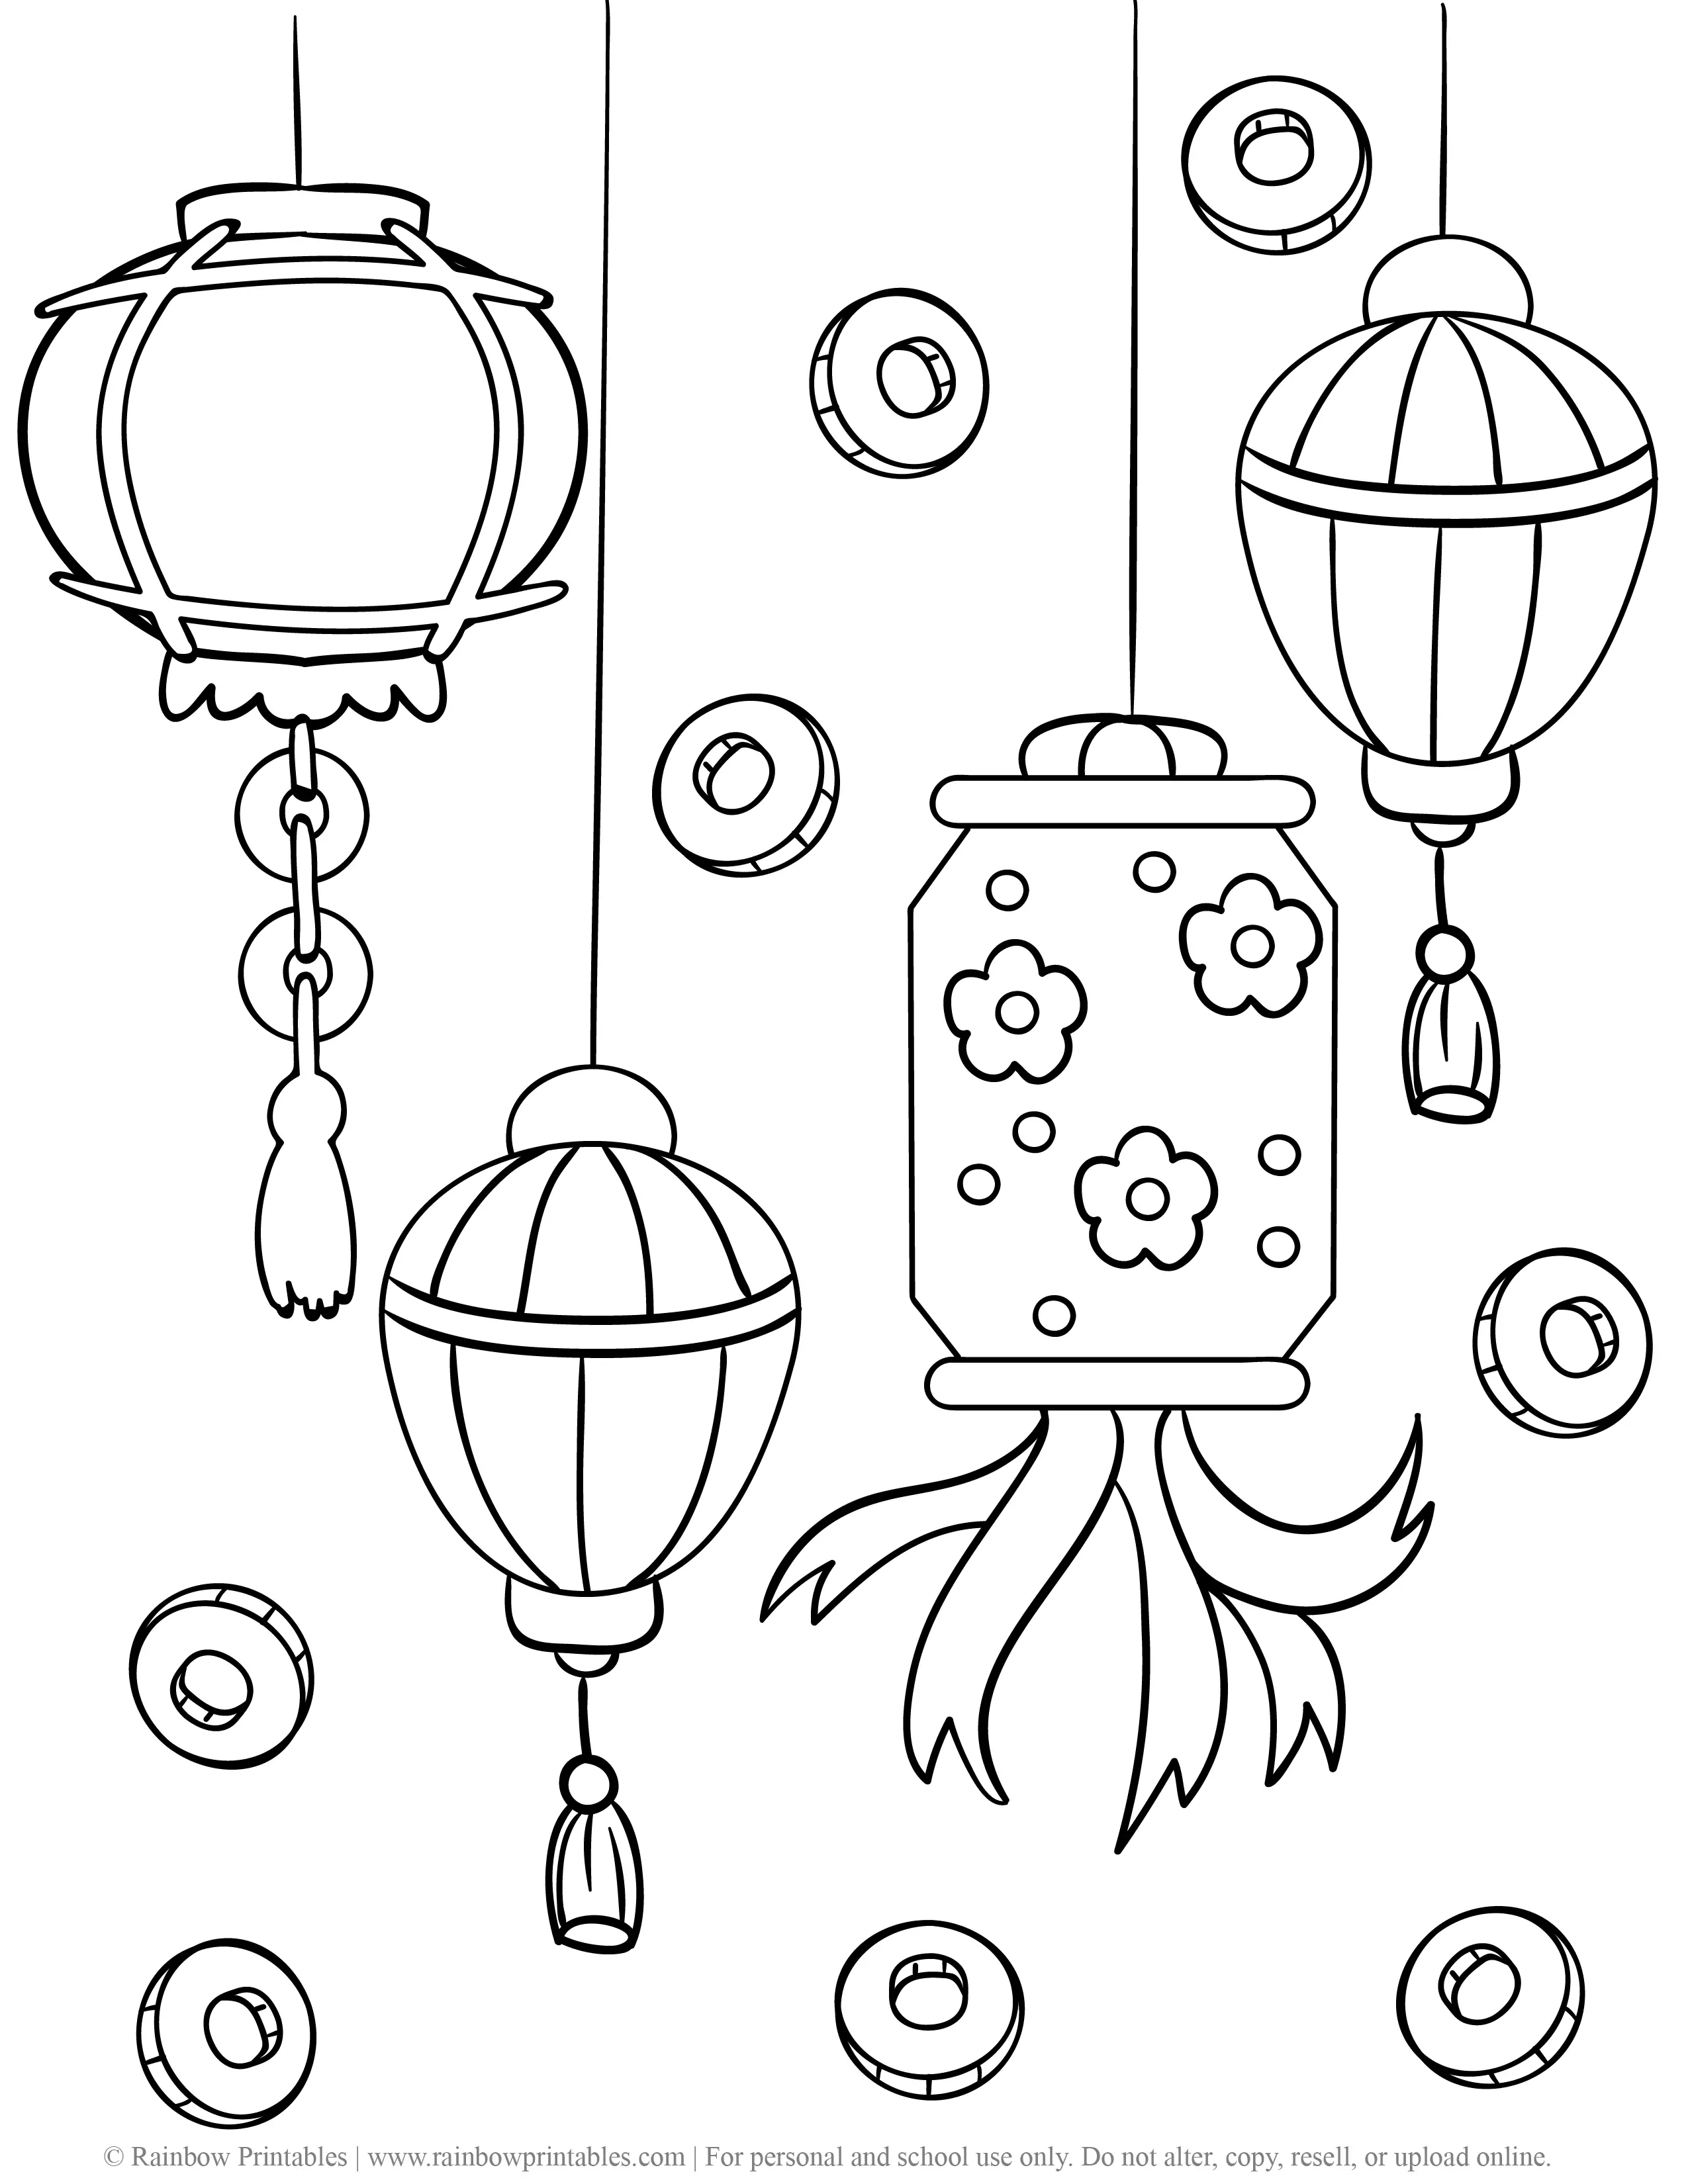 Free Coloring Pages for Kids Drawing Activities Line Art Illustration CHINESE LATERN NEW YEARS ANCIENT COINS CUTE SIMPLE ASIAN